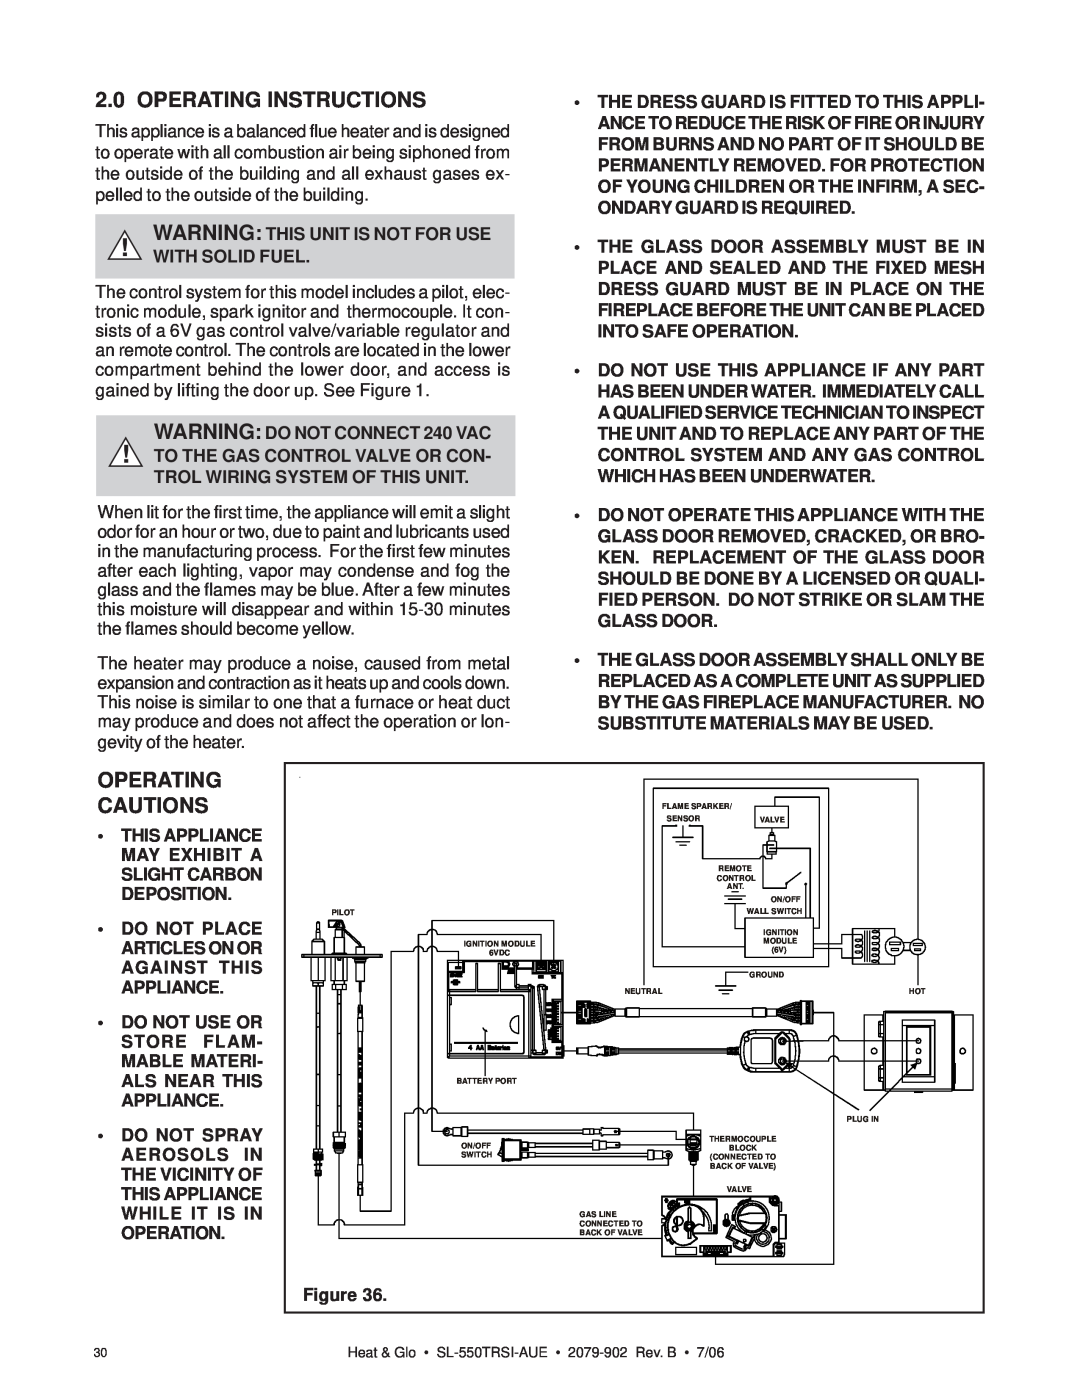 Hearth and Home Technologies SL-550TRSI-AUE Operating Instructions, Operating Cautions, Trol Wiring System Of This Unit 